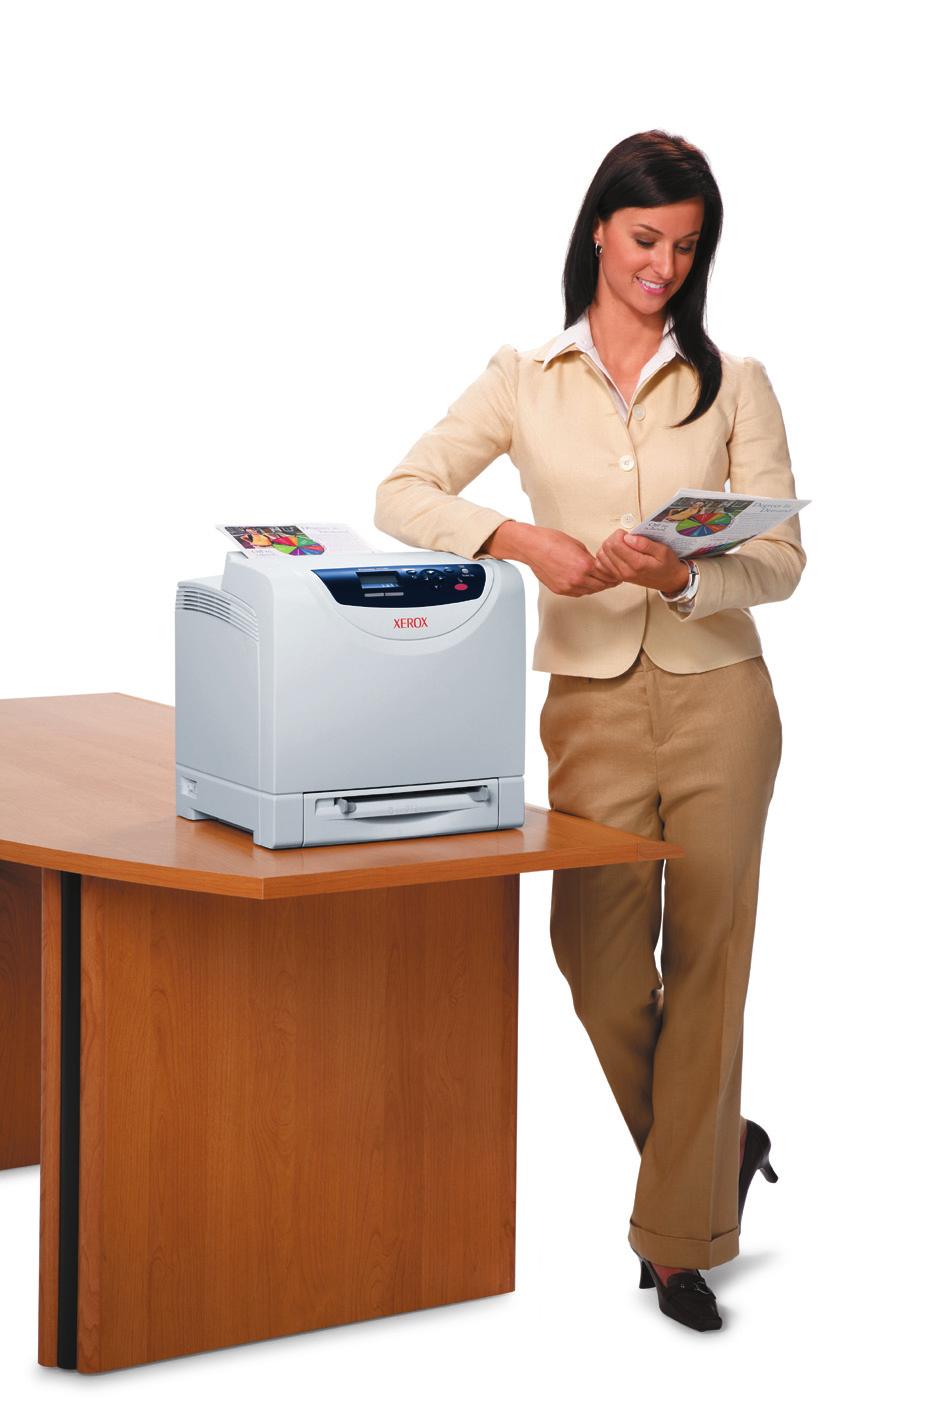 About this Guide This guide will introduce you to Xerox Phaser 6125/6130 color laser printers and help you in your printer evaluation process.